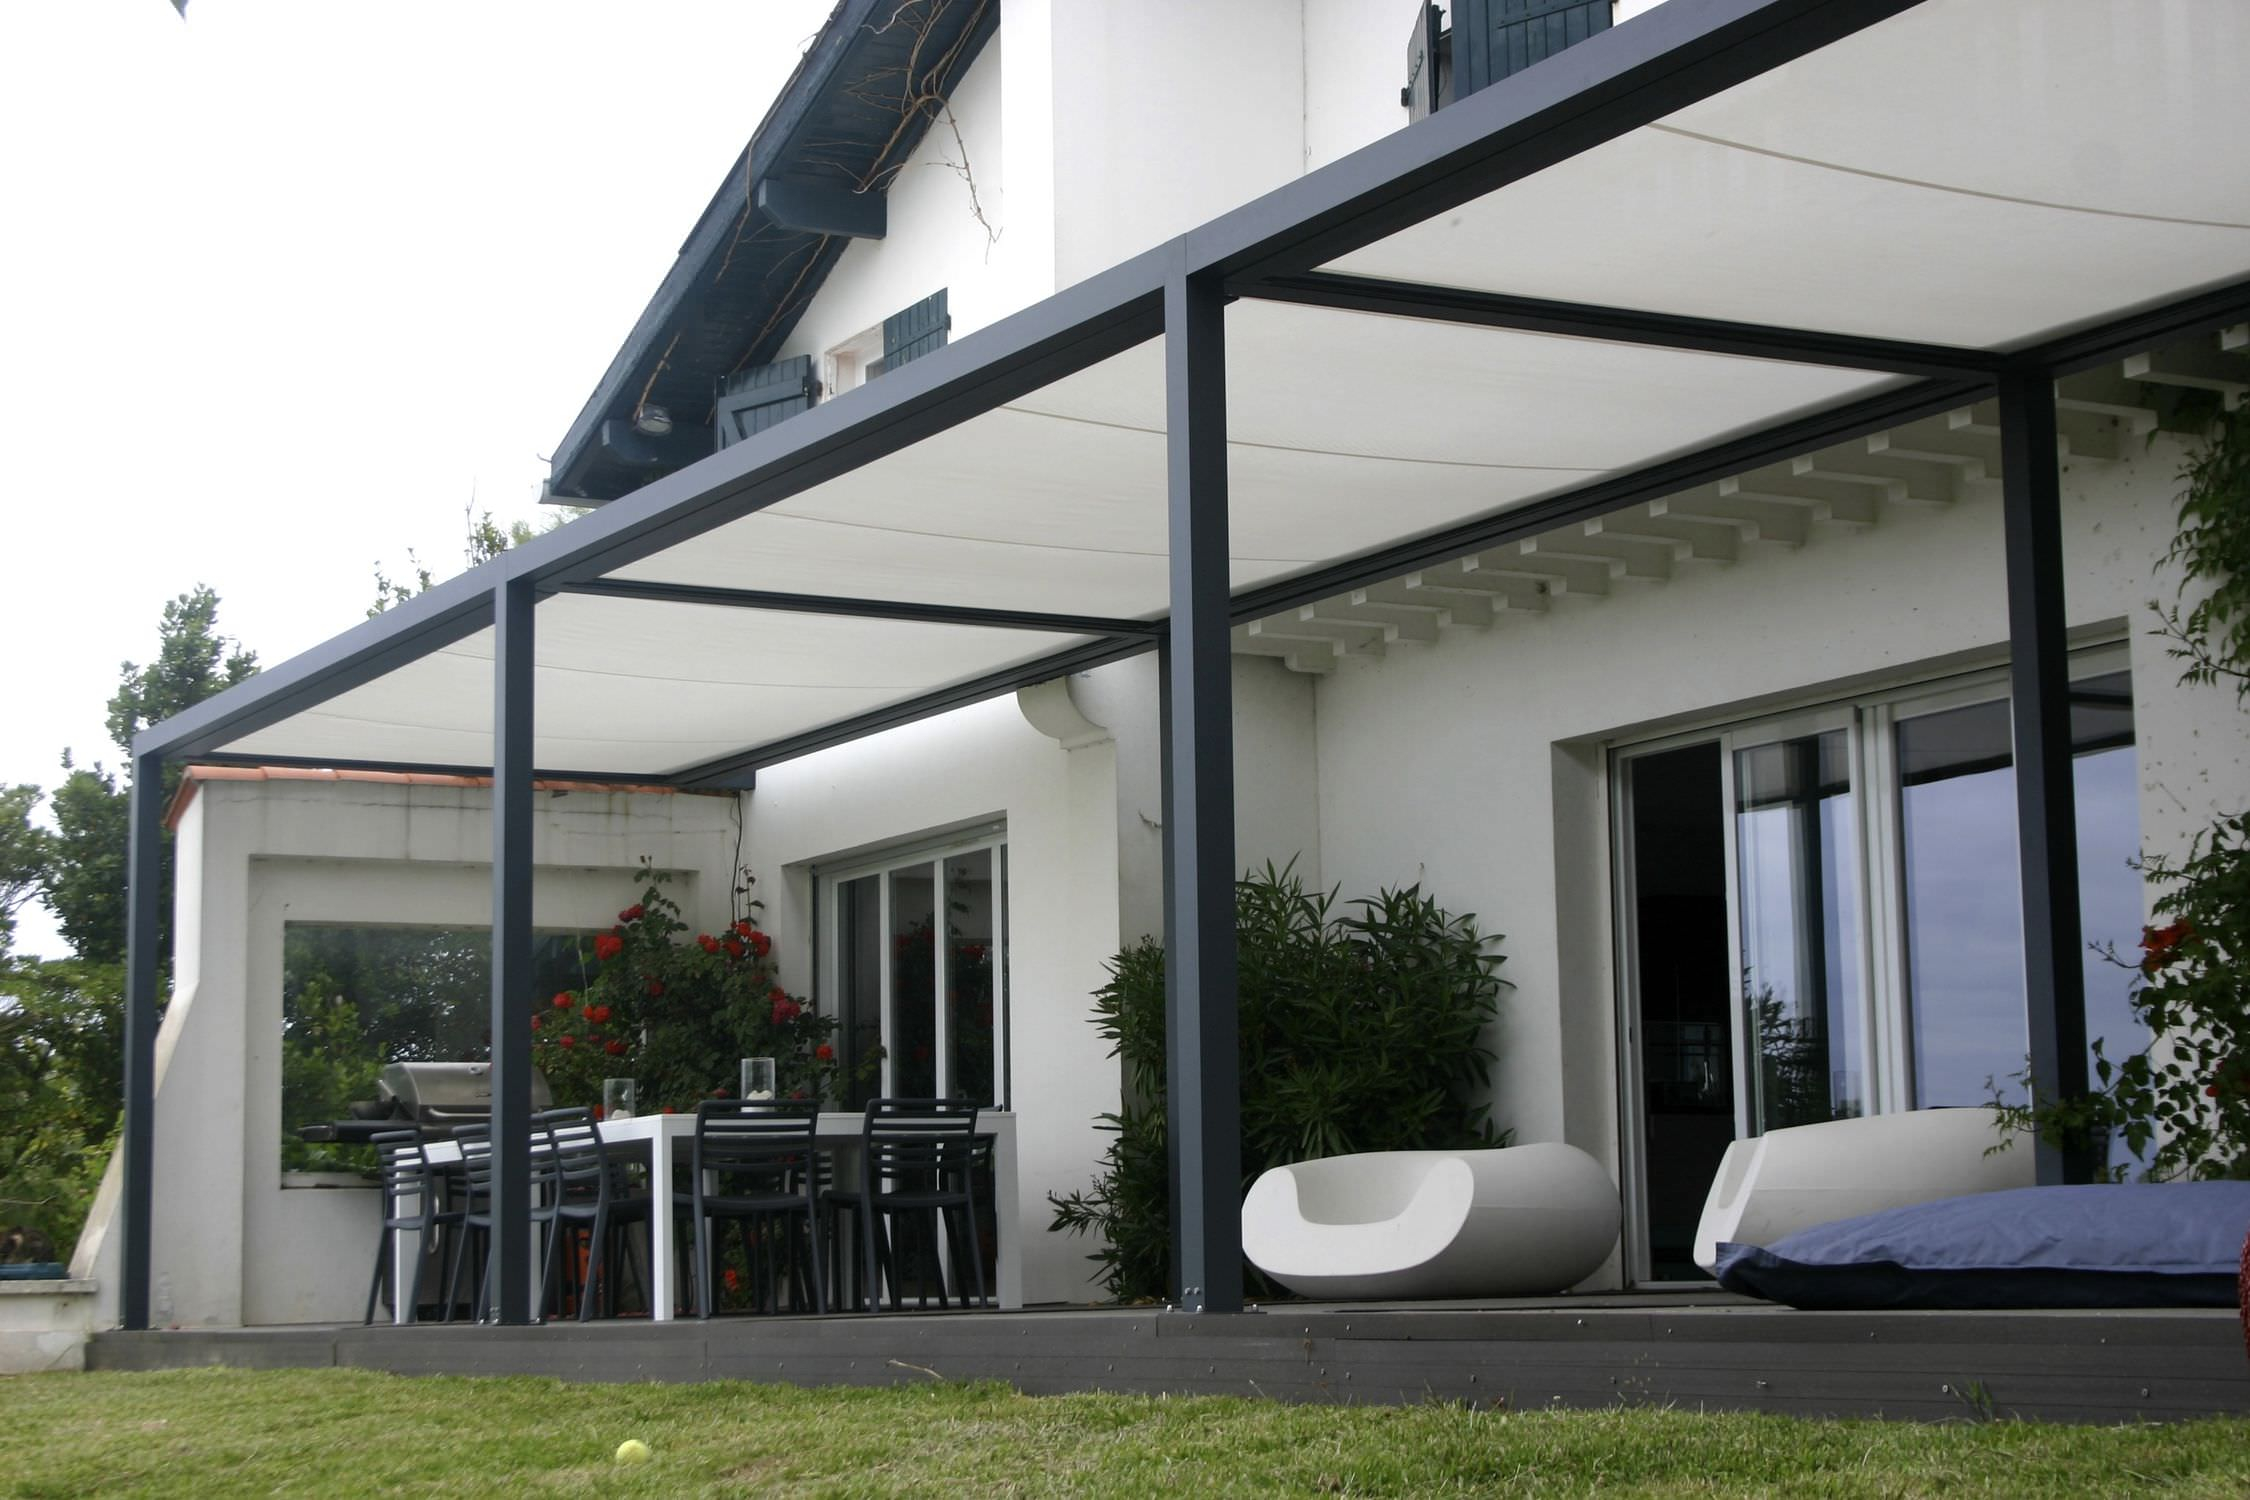 Backyard Patio Covers From Usefulness To Style Homesfeed with regard to dimensions 2250 X 1500